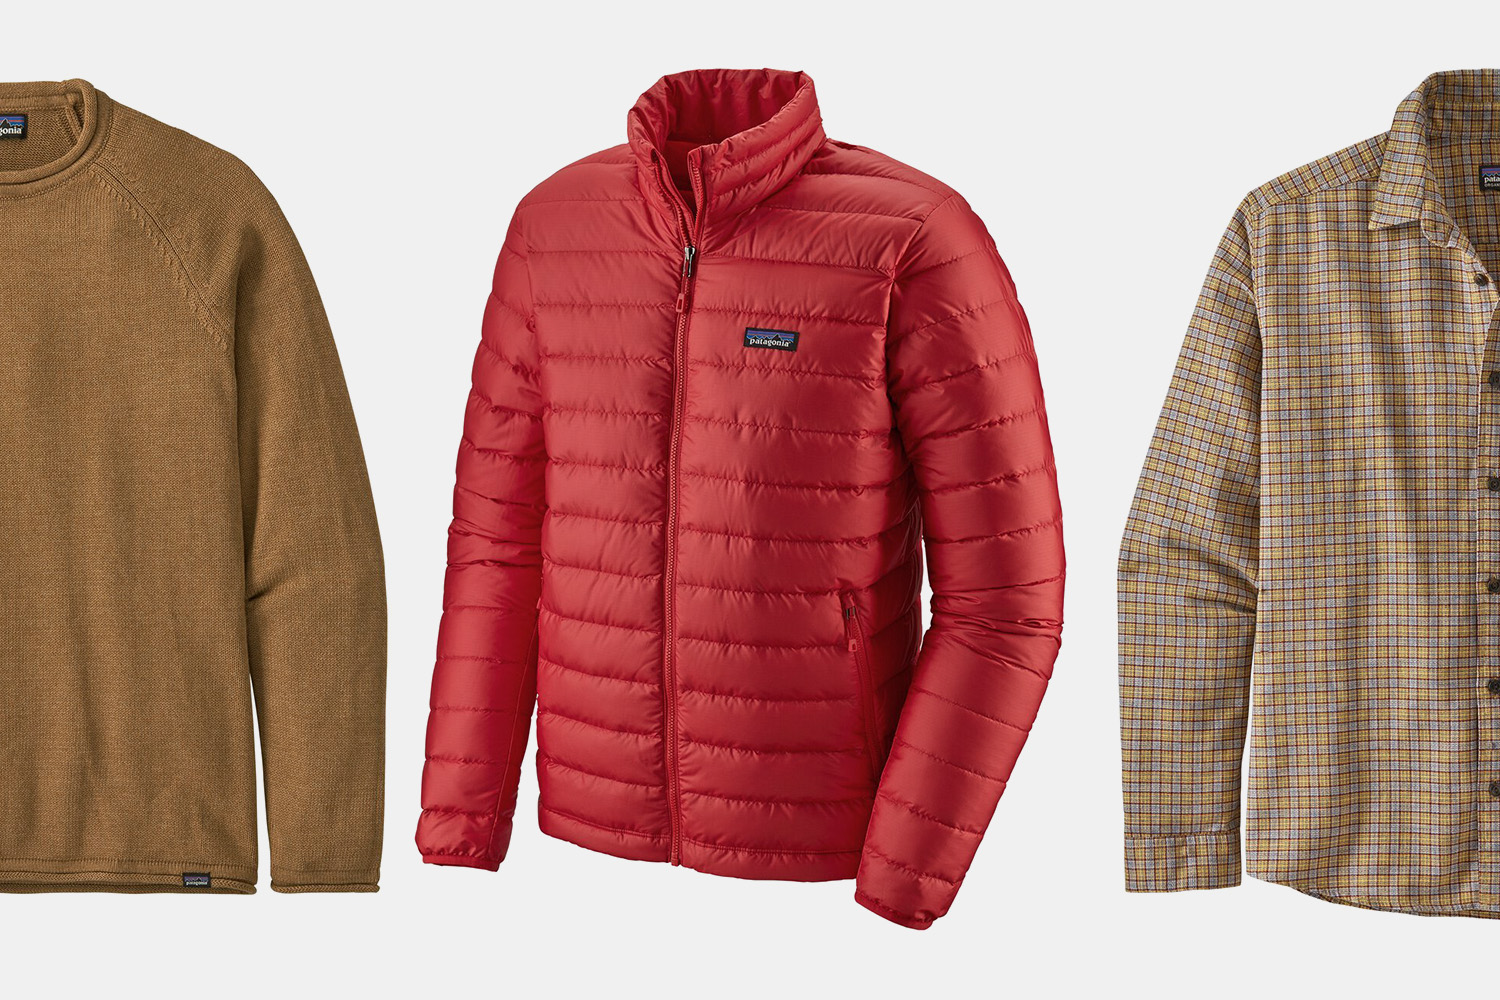 Shop Patagonia Fleeces, Puffers and More Up to 40% Off - InsideHook